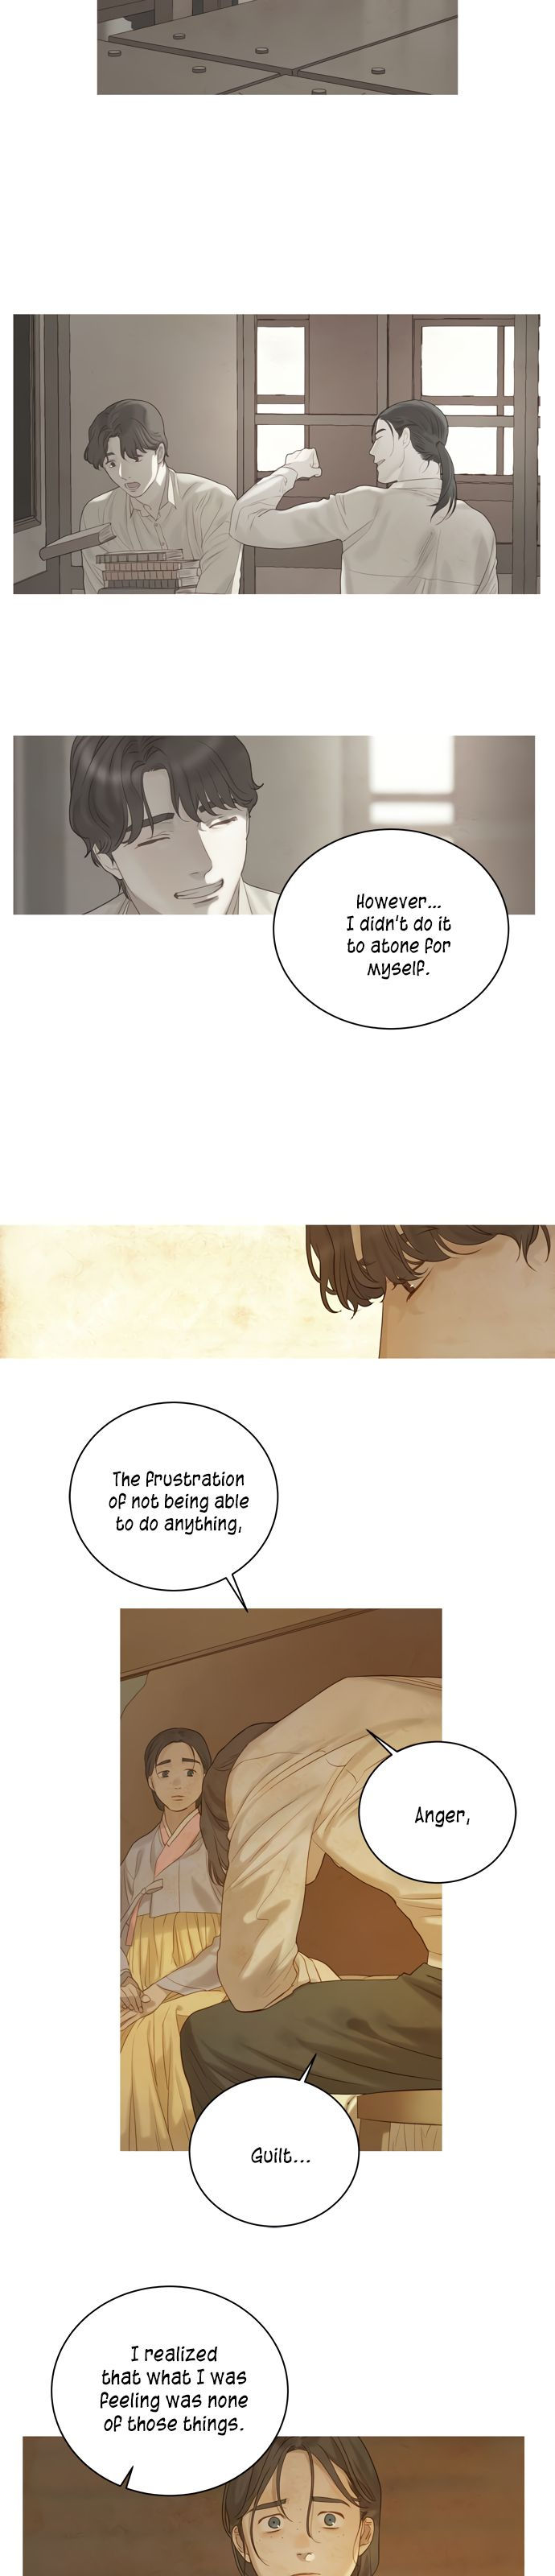 The Whale Star - The Gyeongseong Mermaid - Chapter 23 Page 6